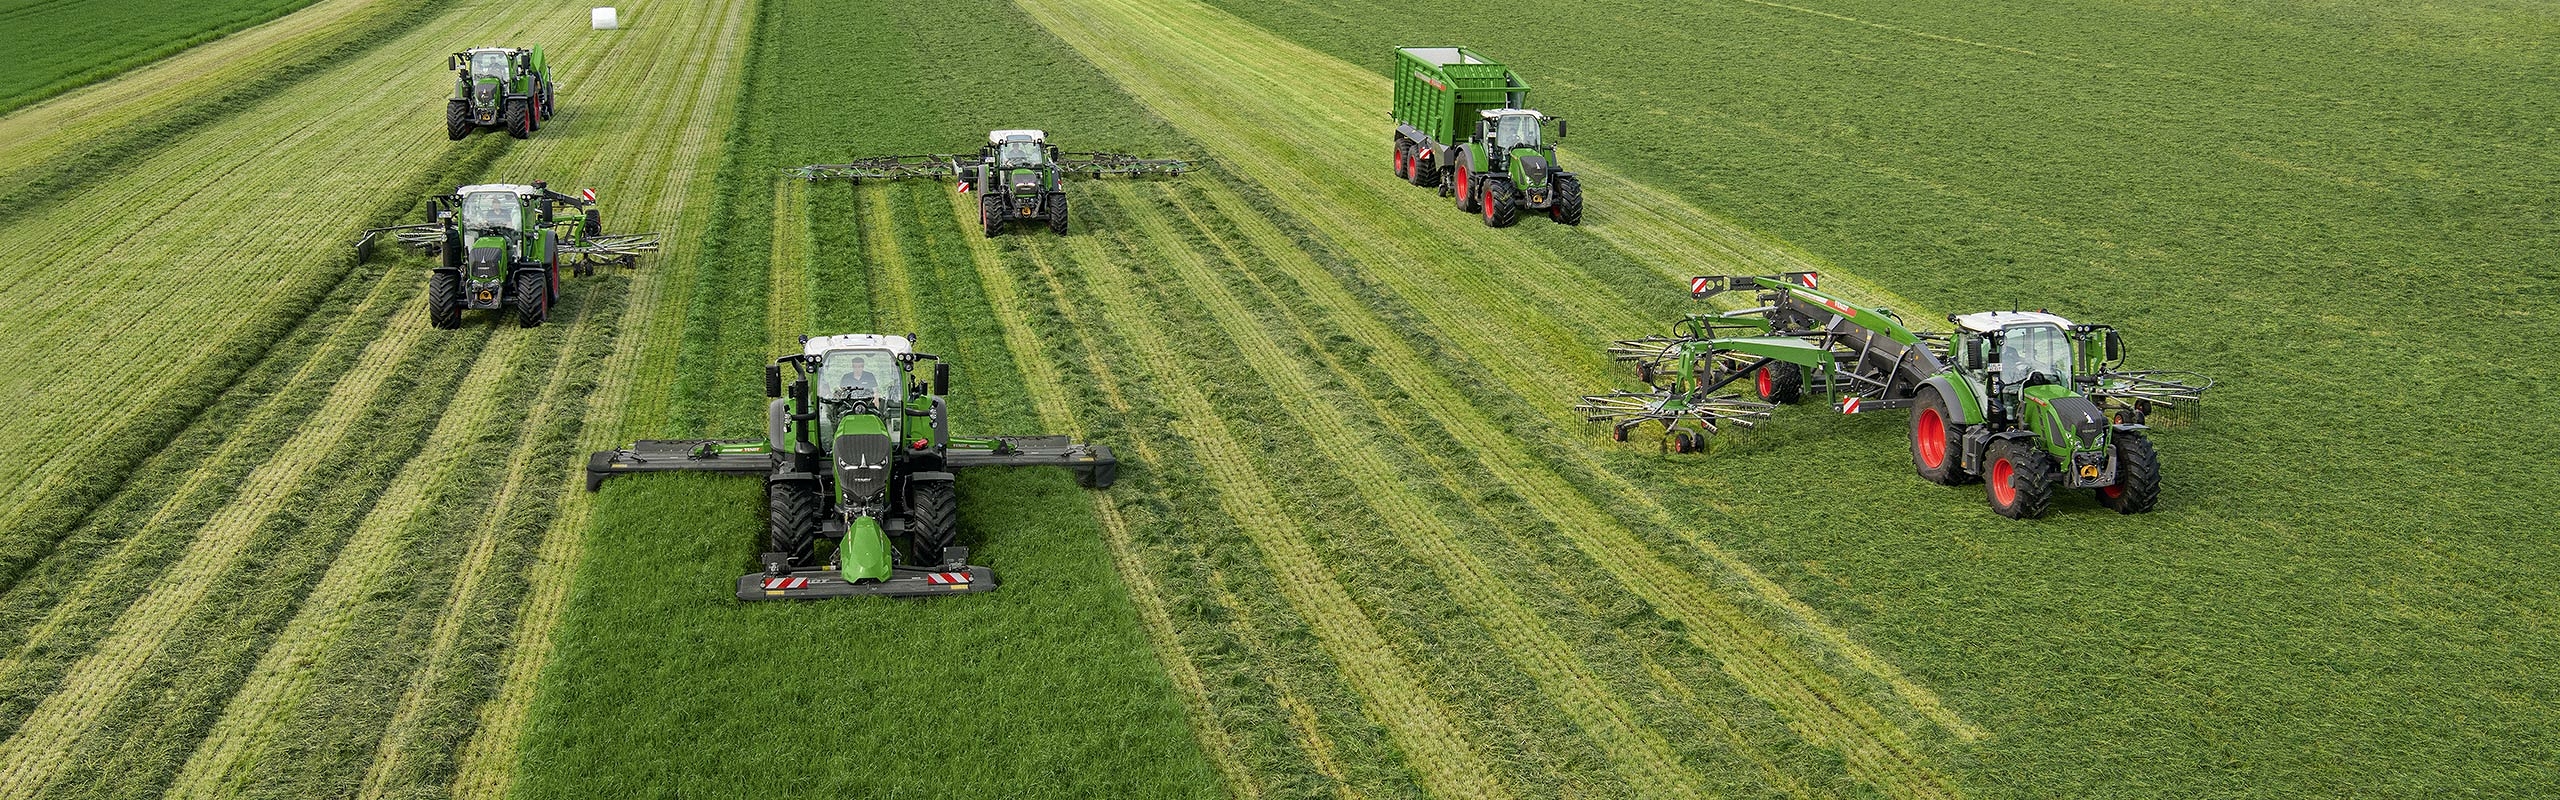 Several Fendt tractors with different implements drive side by side in a field